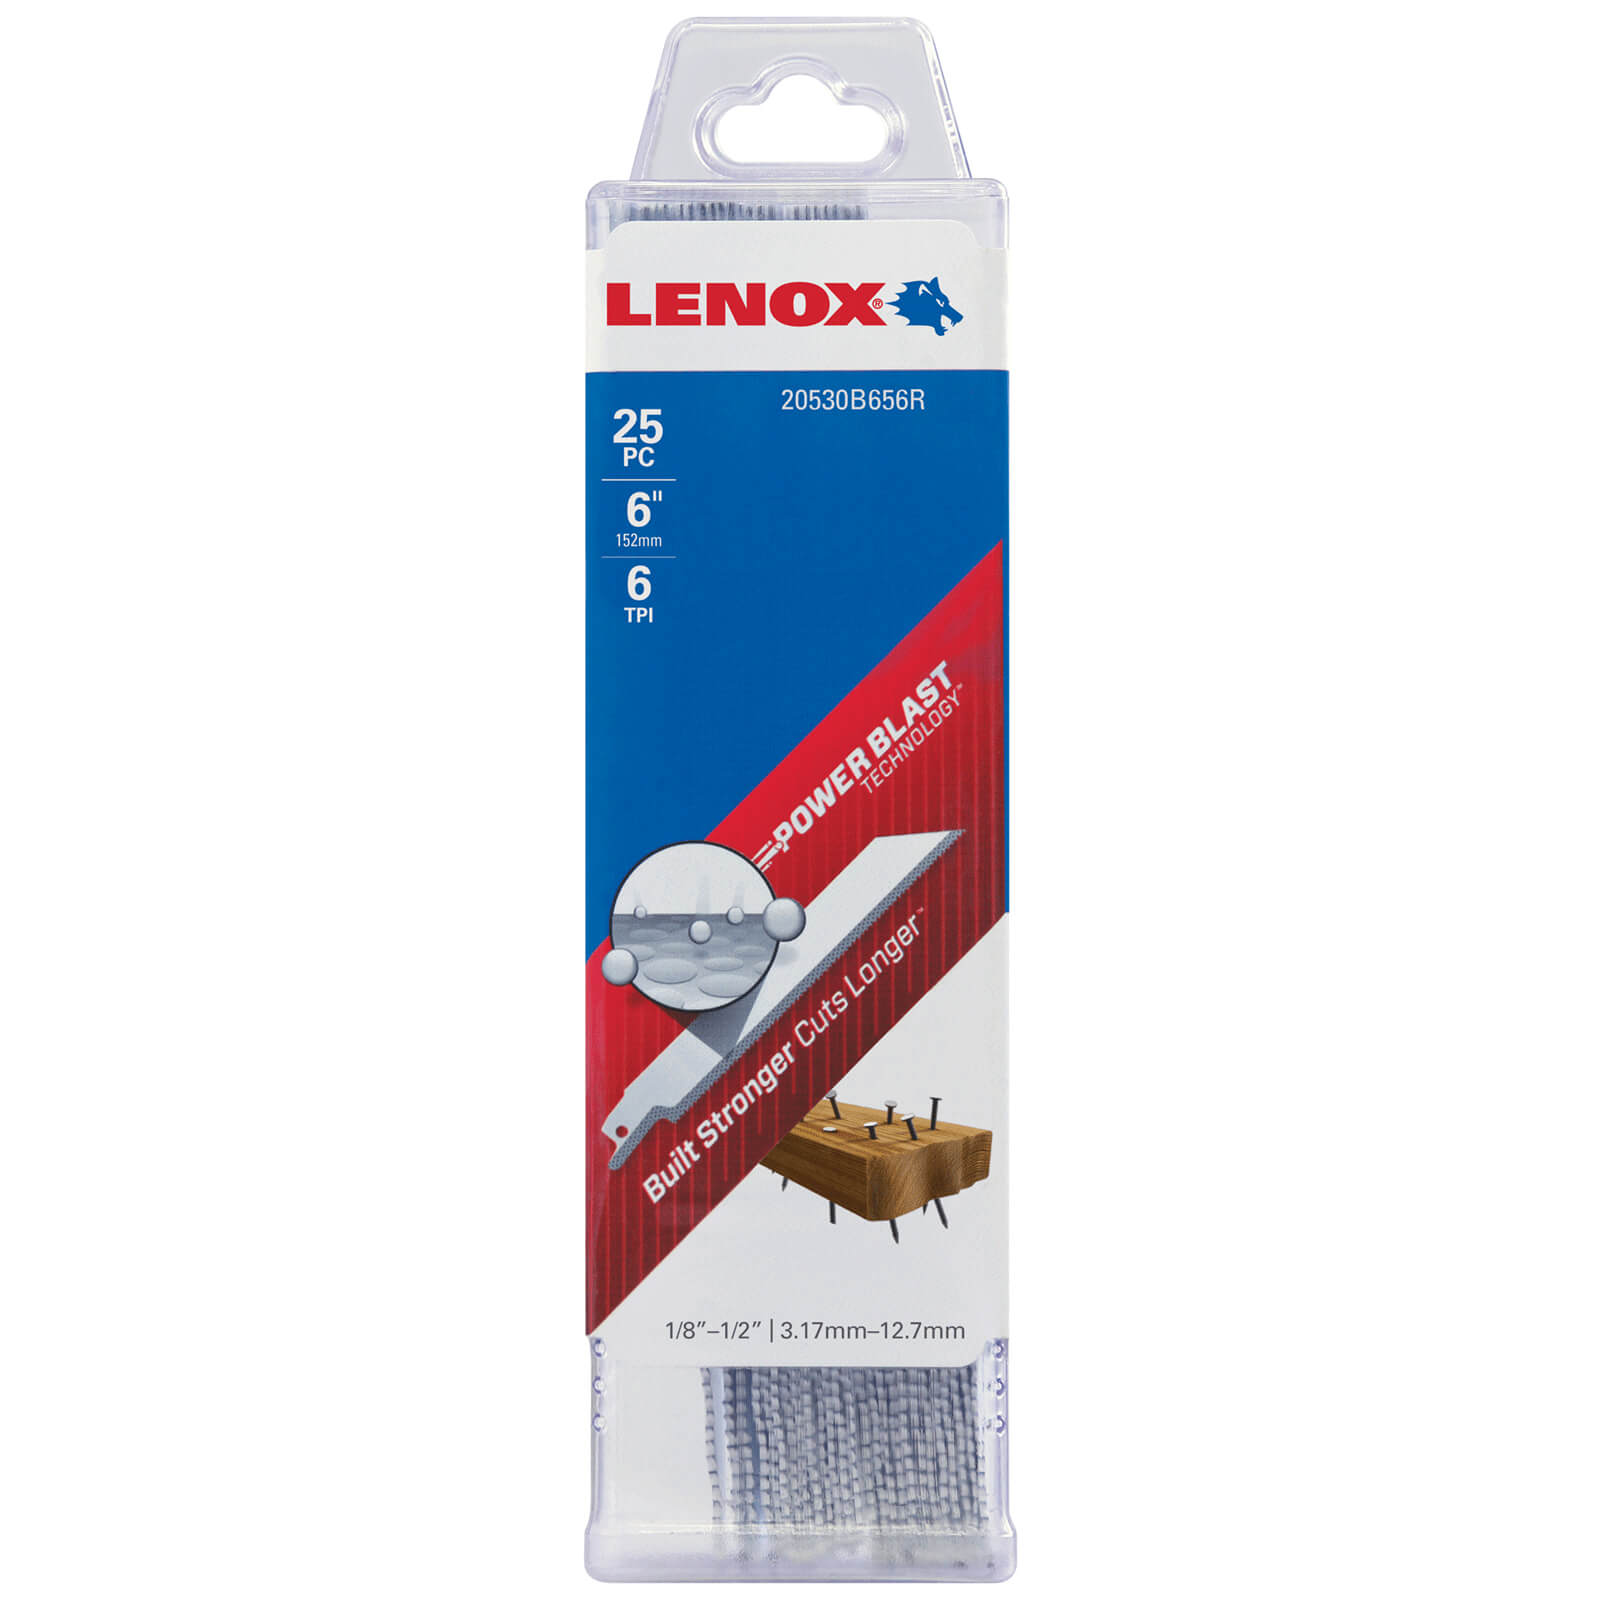 Image of Lenox 6TPI Nail Embedded Wood Cutting Reciprocating Sabre Saw Blades 229mm Pack of 25